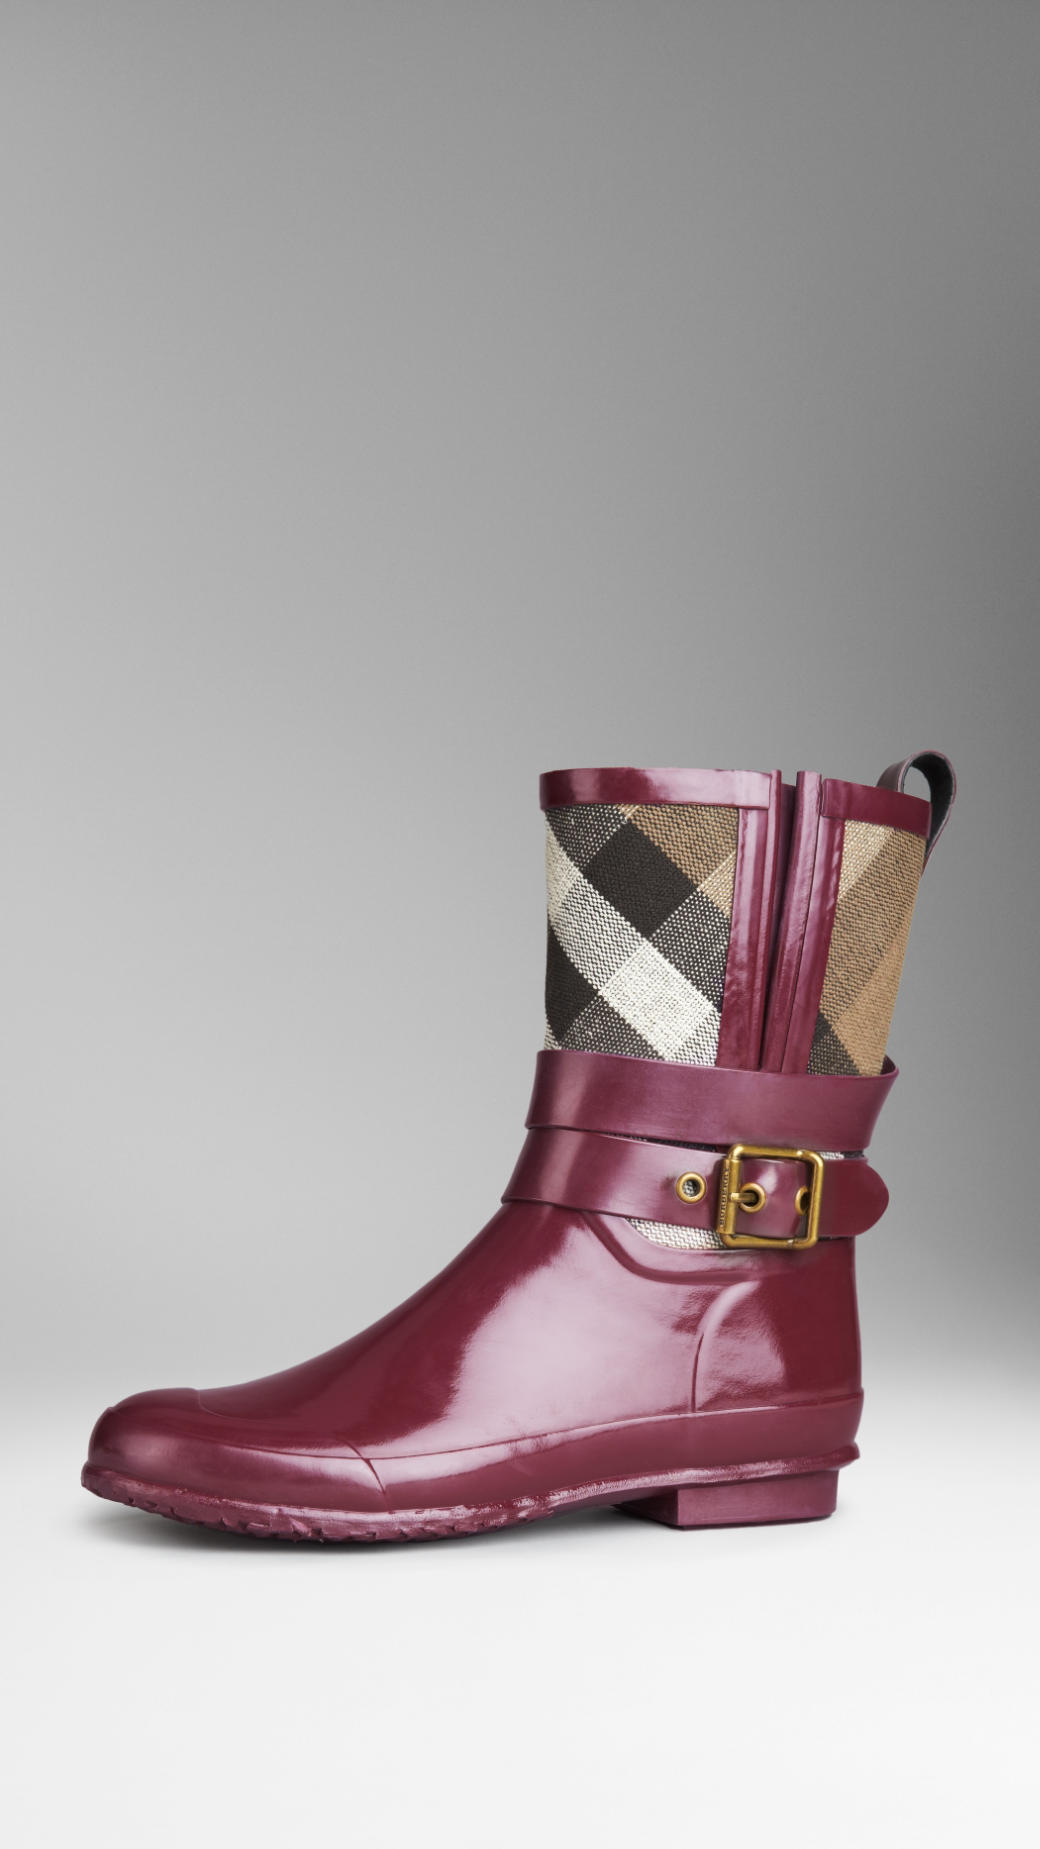 burberry boots mens pink